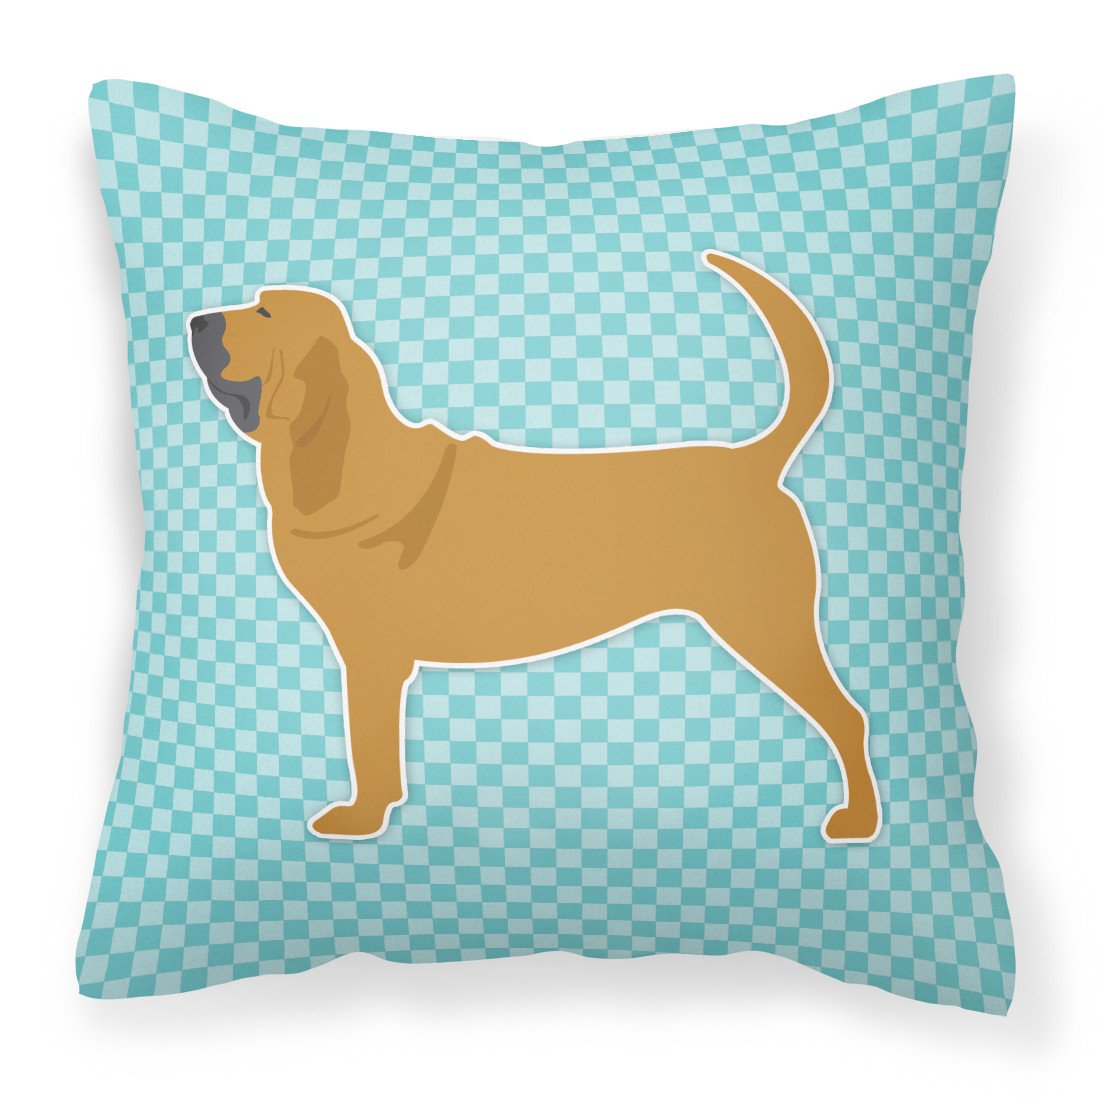 Bloodhound  Checkerboard Blue Fabric Decorative Pillow BB3684PW1818 by Caroline's Treasures